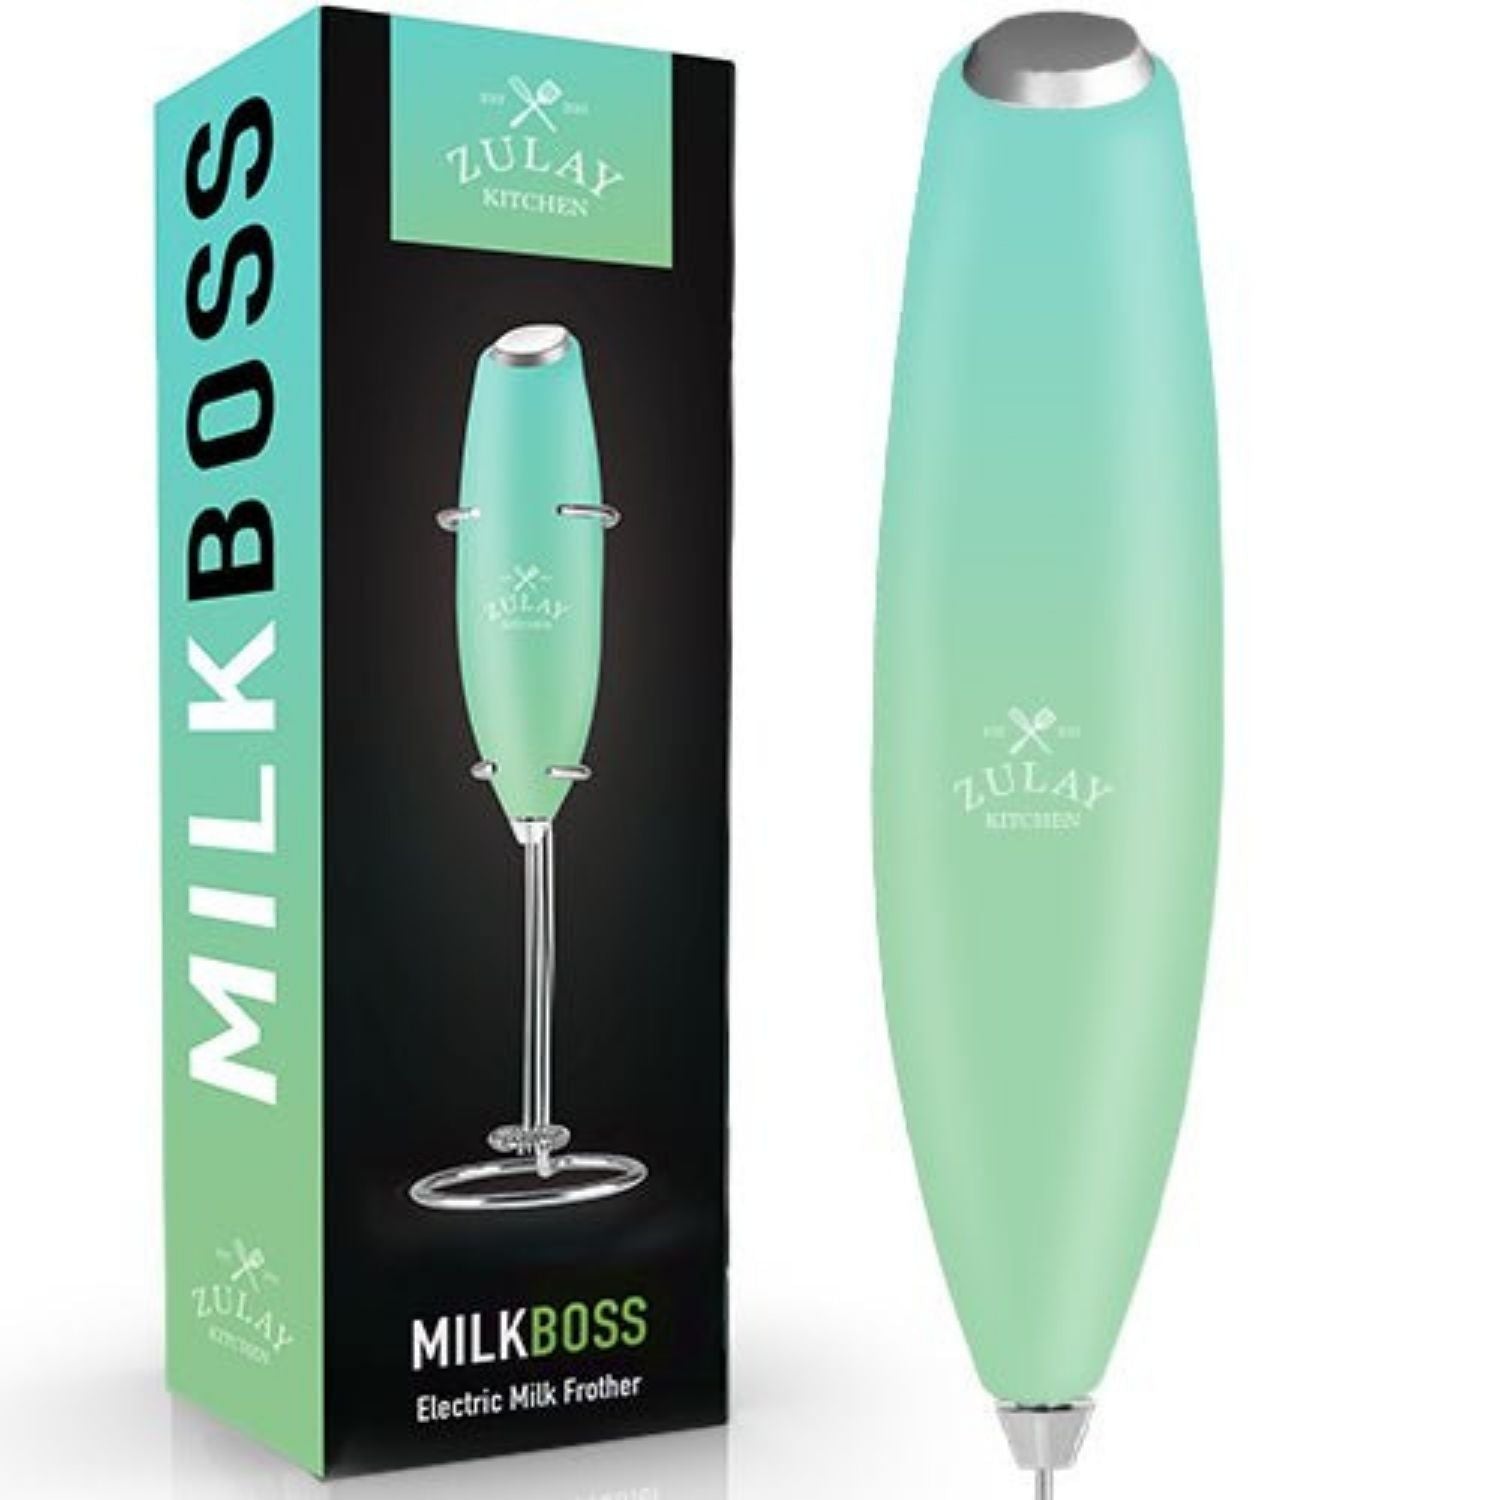 Zulay Kitchen Milk Boss Milk Frother With Holster Stand - Teal, 1 - Ralphs